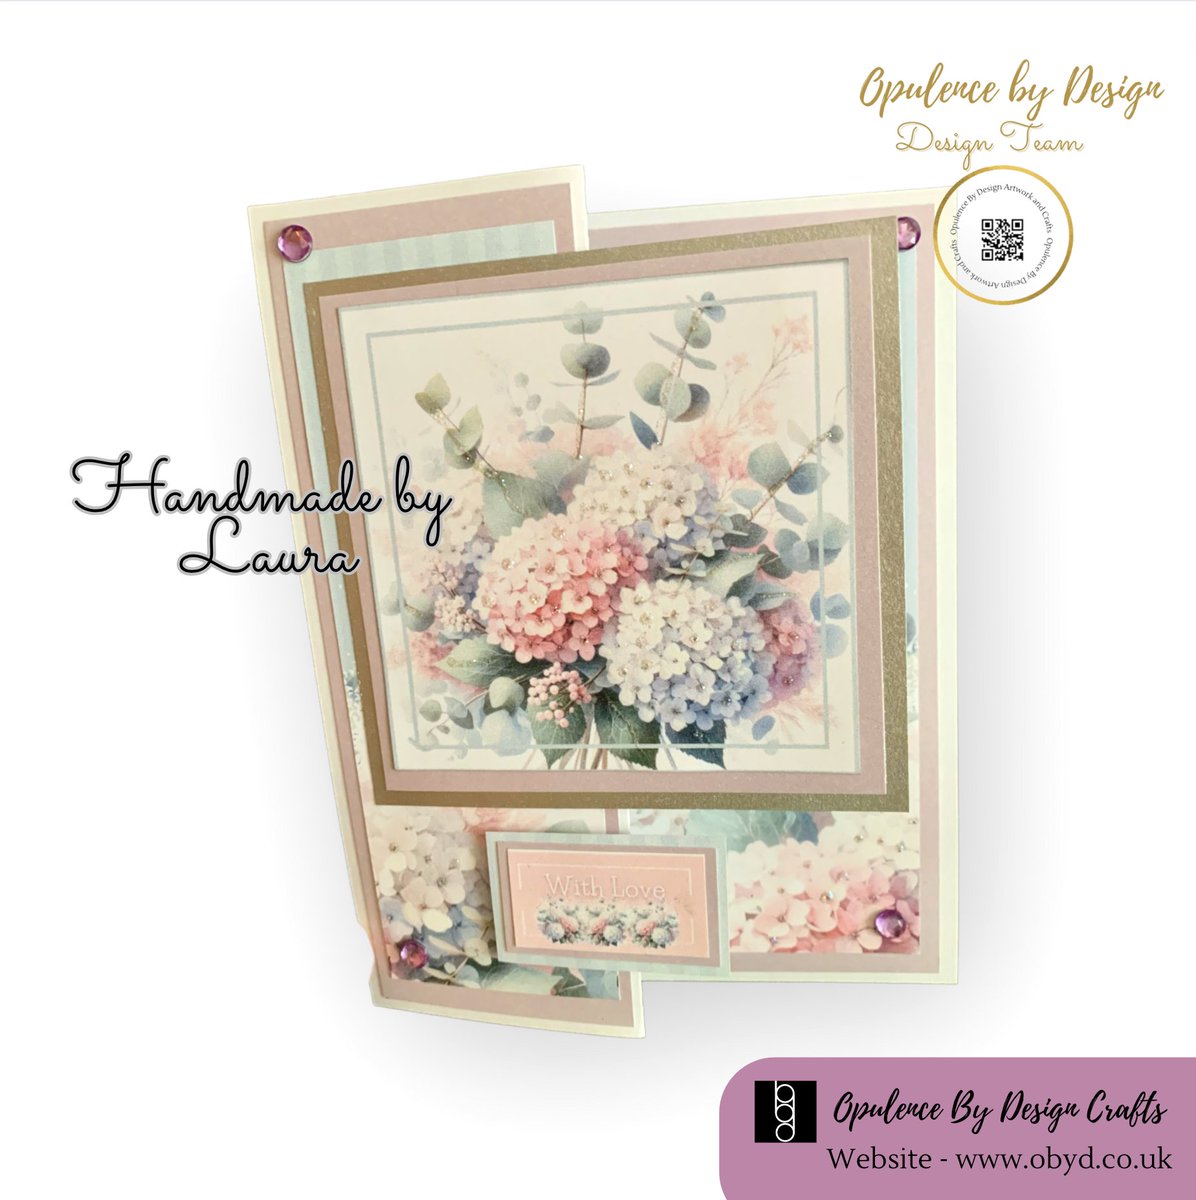 So many beautiful cards made for todays new Happy Hydrangeas Kit - you can find the kit and all of the samples on the website - shop.obyd.co.uk/b/KPHIy

#cardmaking #cardmakingkit #handmade #handmadecards #cardmakingideas